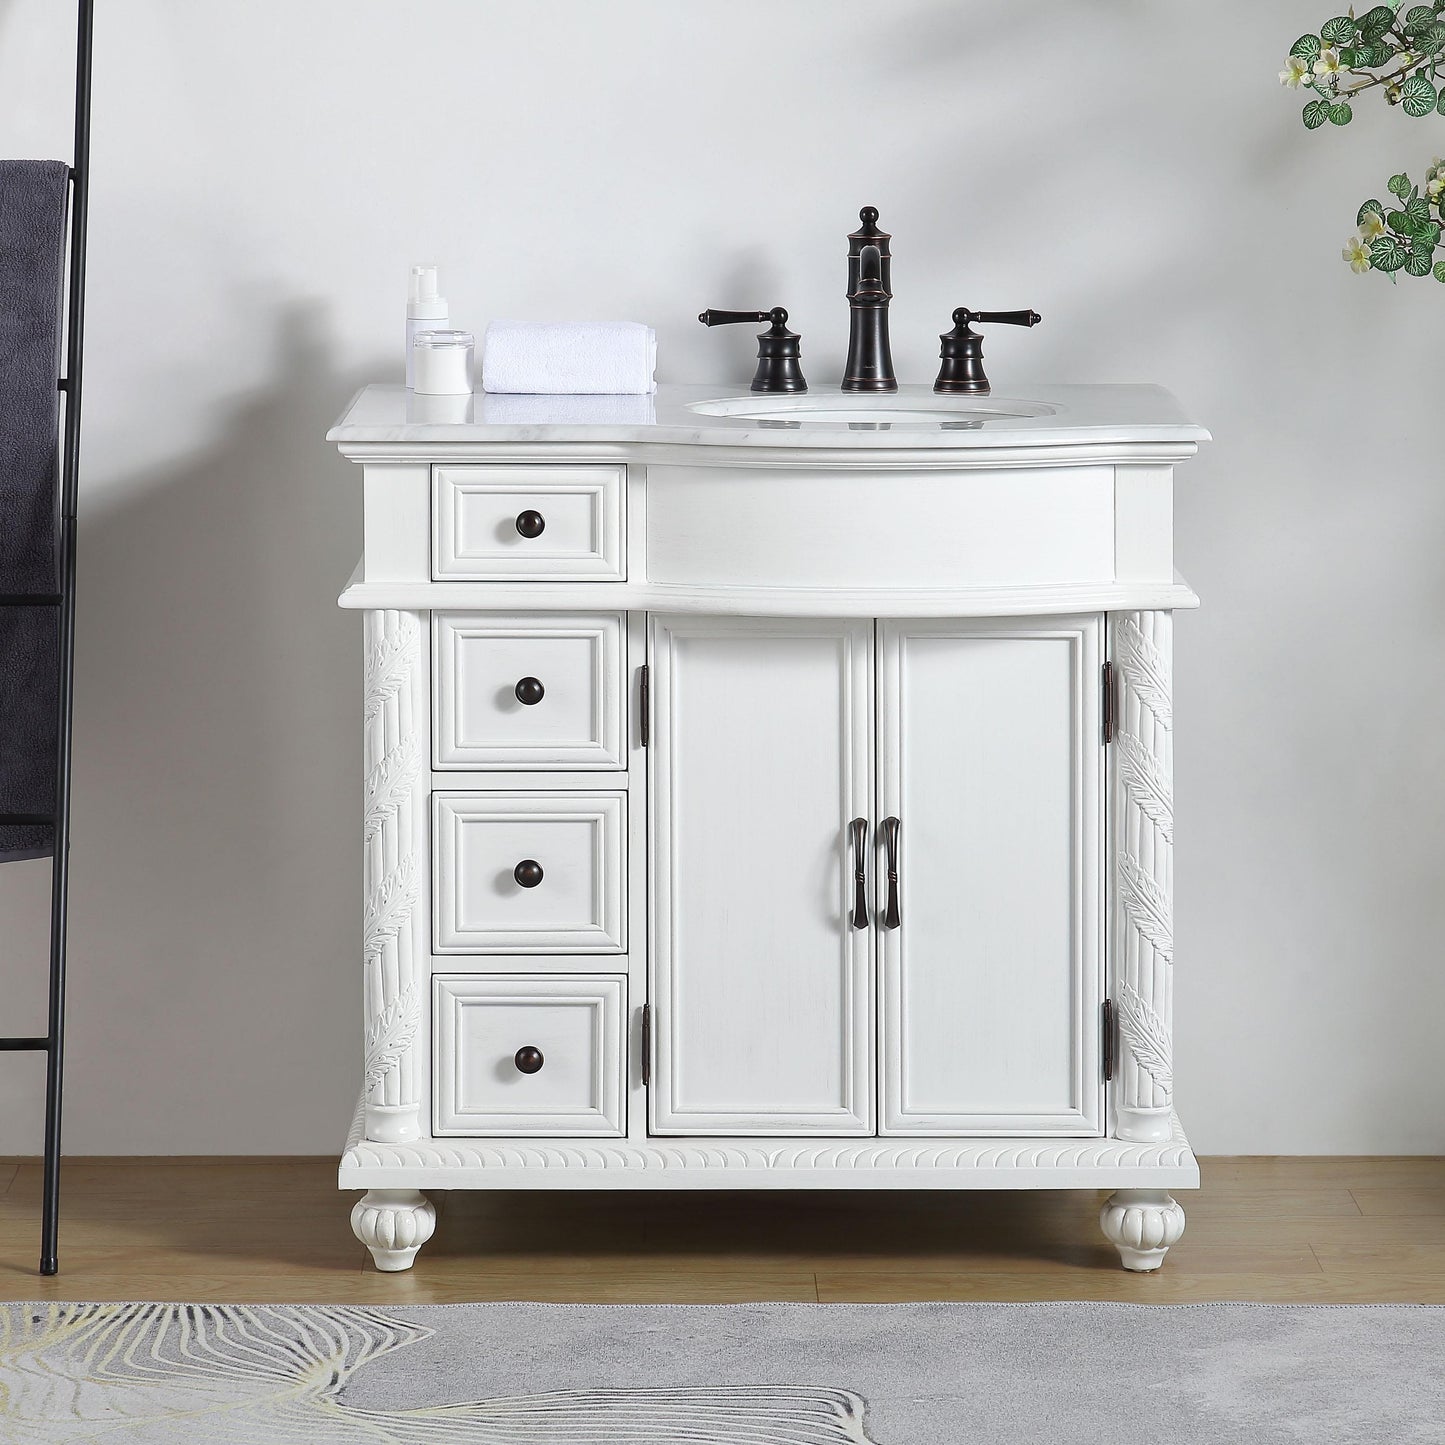 Silkroad Exclusive Silkroad Exclusive 36” Single Right Sink White Bathroom Vanity with White Marble Top V0213WW36R